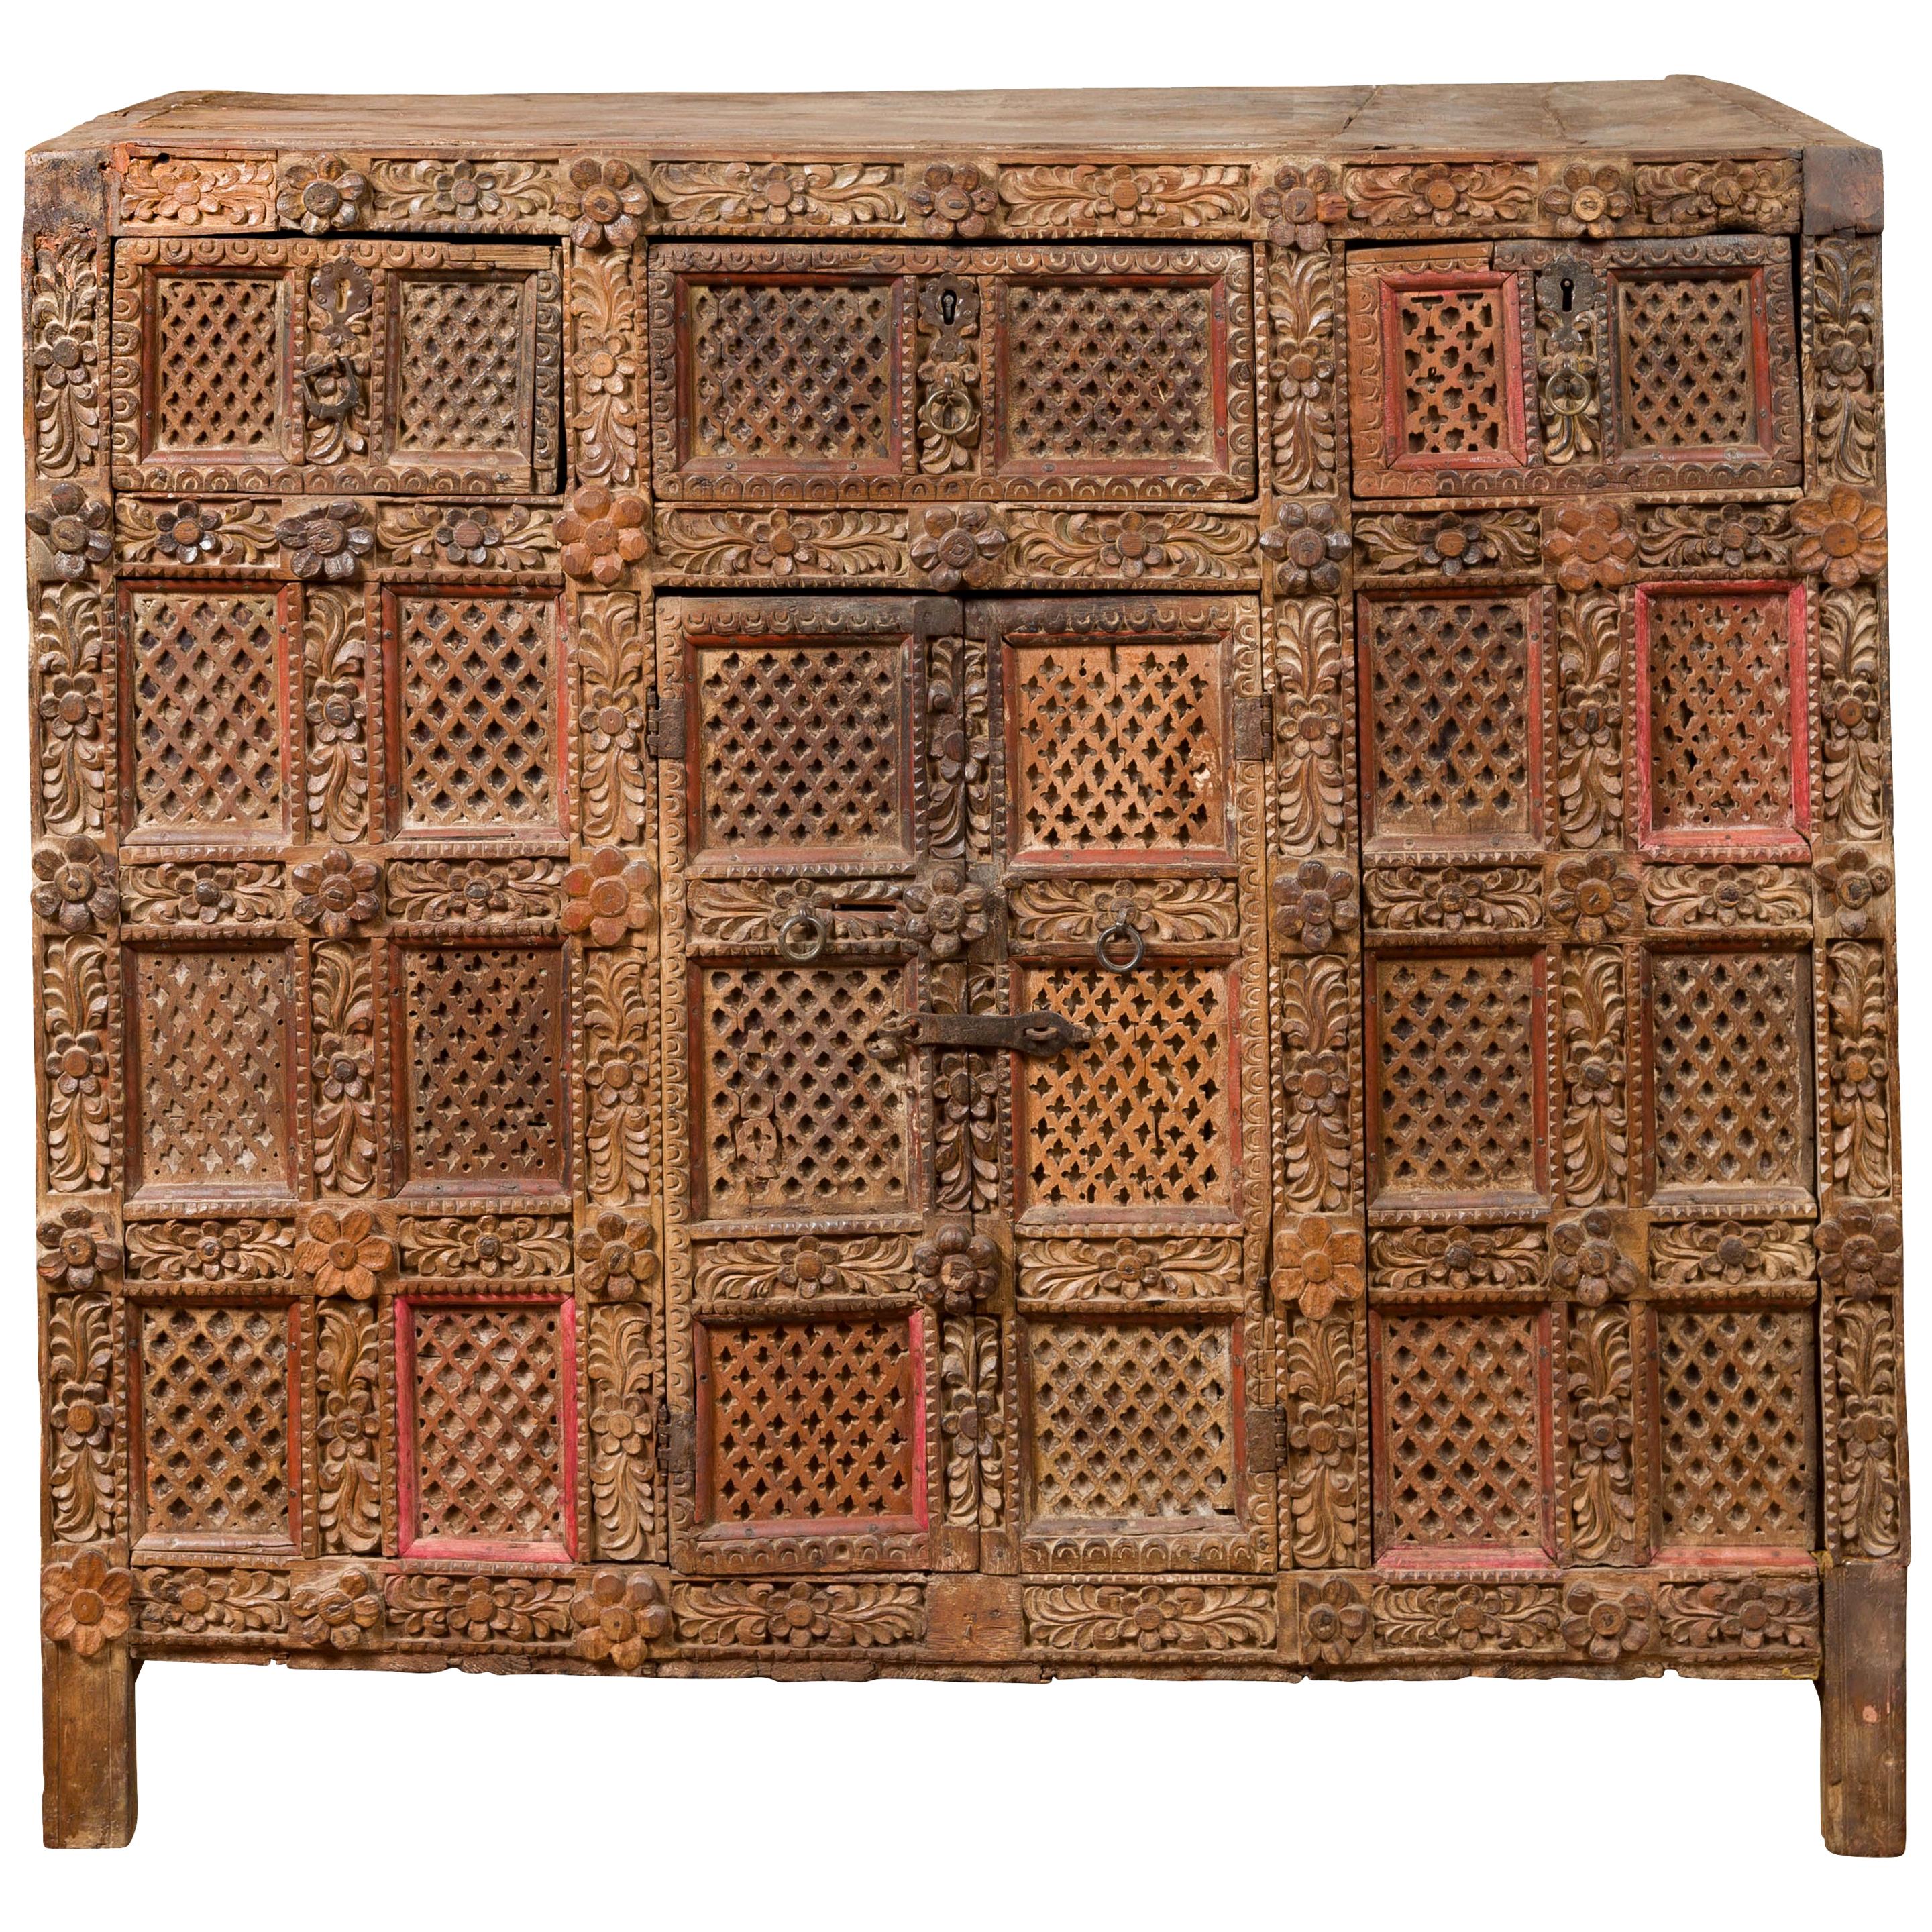 Indian Rubbed Wood Palace Cabinet with Carved Floral Decor and Red Patina